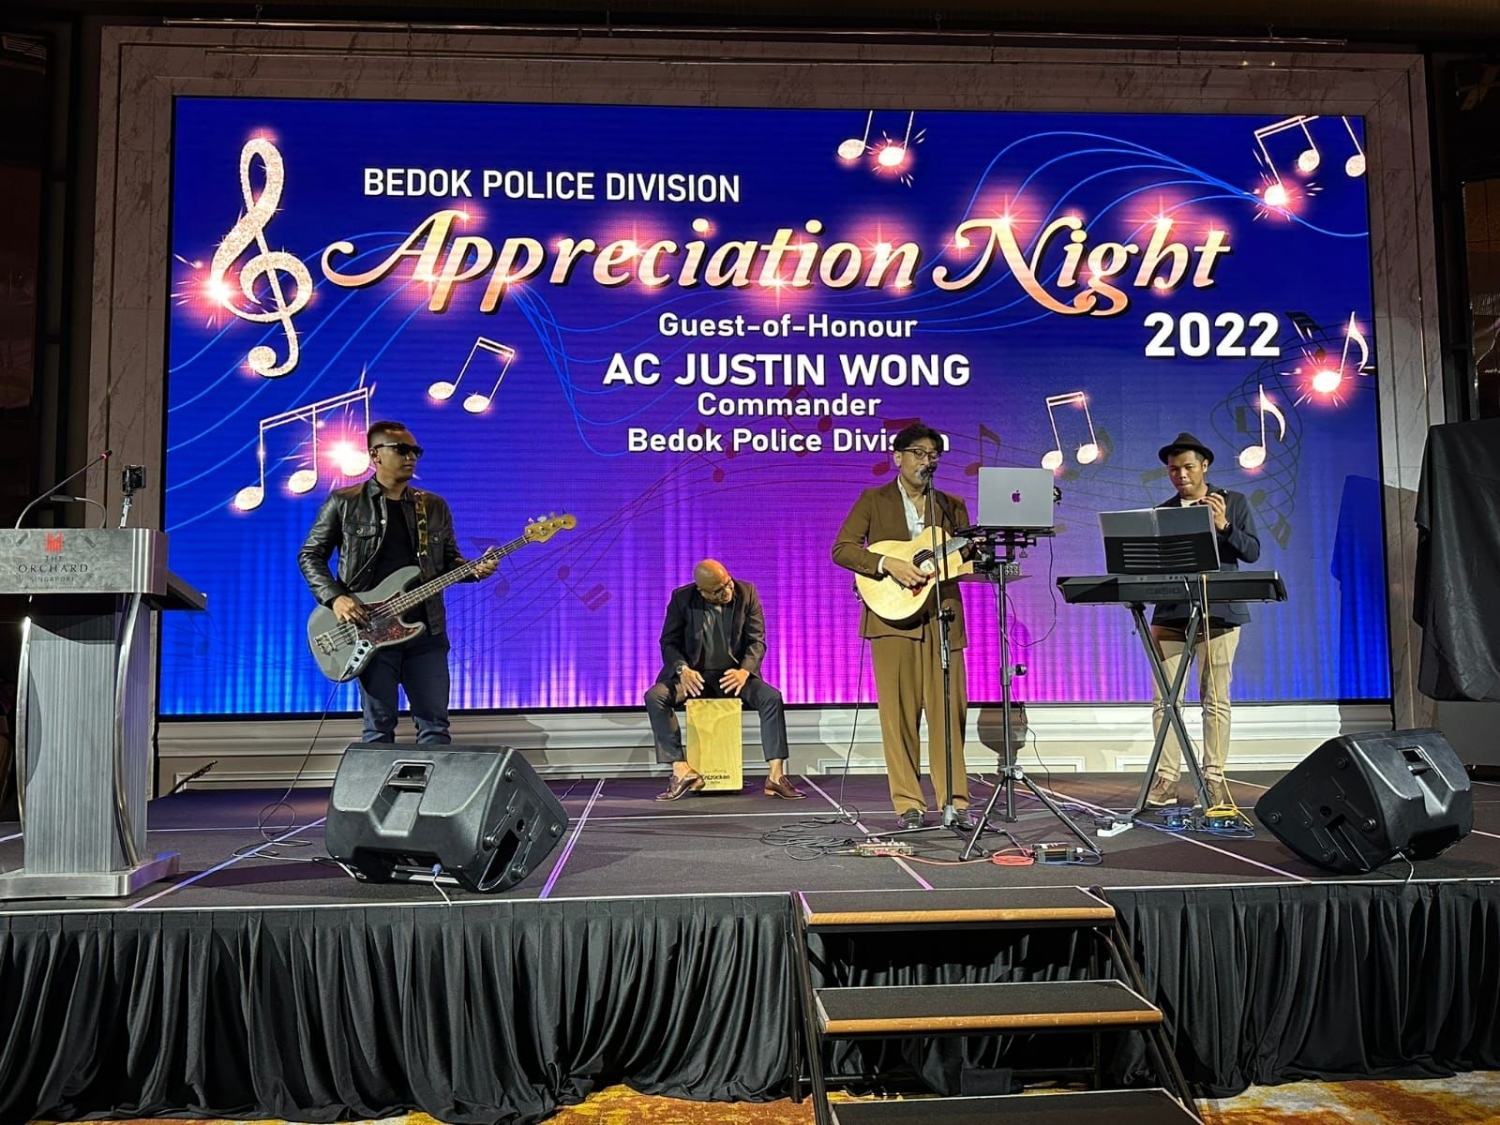 four officers on stage performing. There is a bright blue backdrop that says "Bedok Police Division Appreciation Night 2022" in the background.